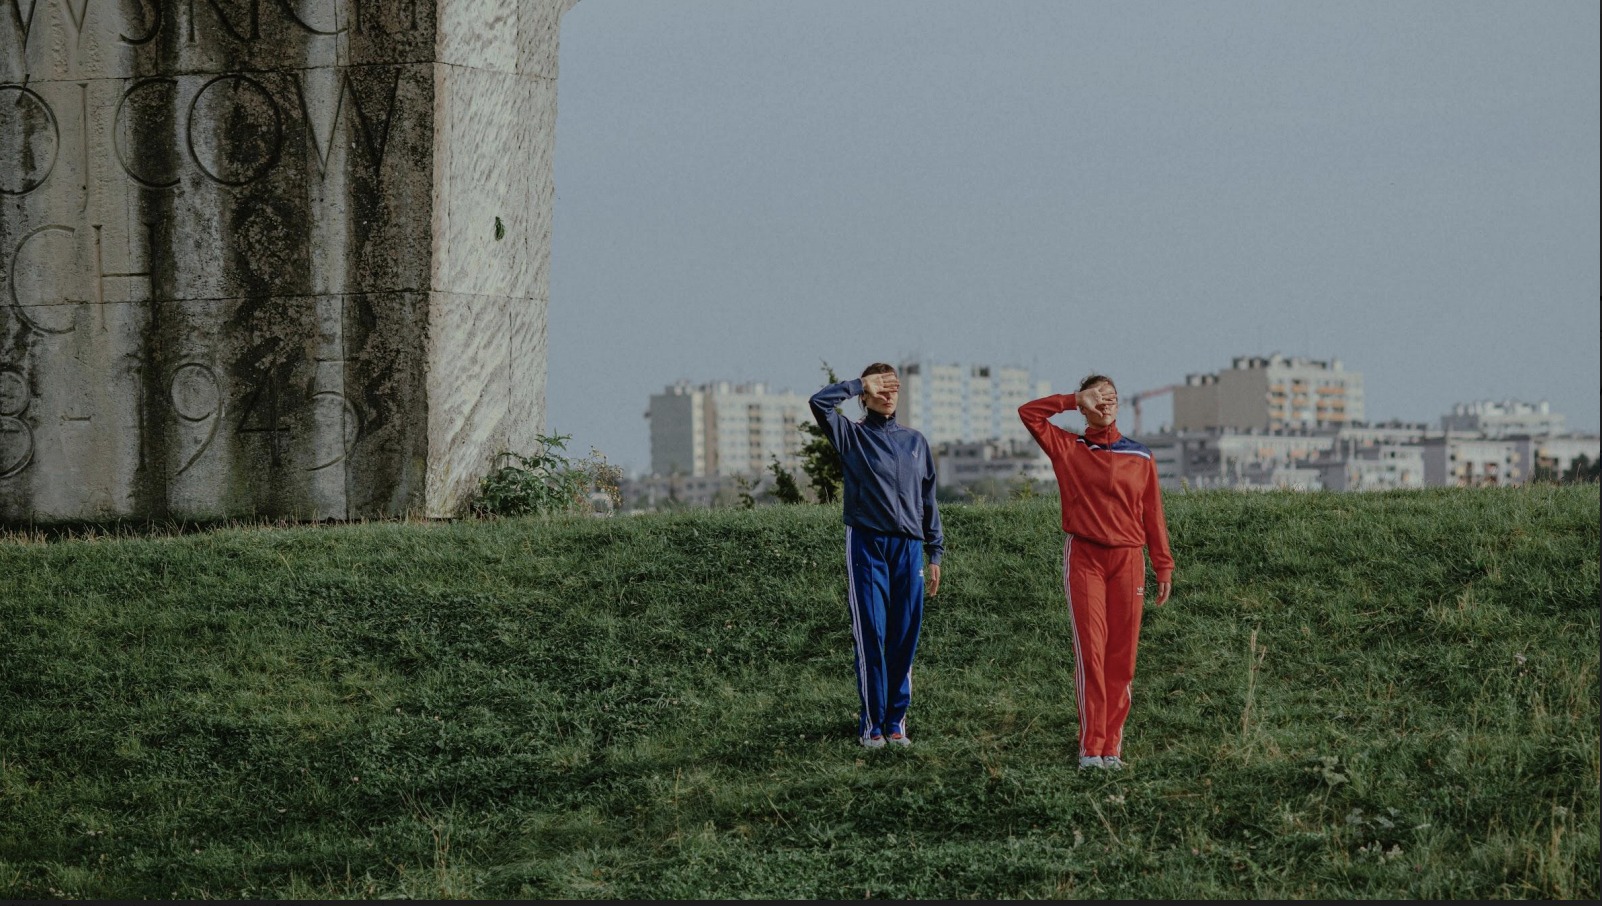 Artists from all over the world selected to participate in the Vilnius Biennial of Performance Art through an open call